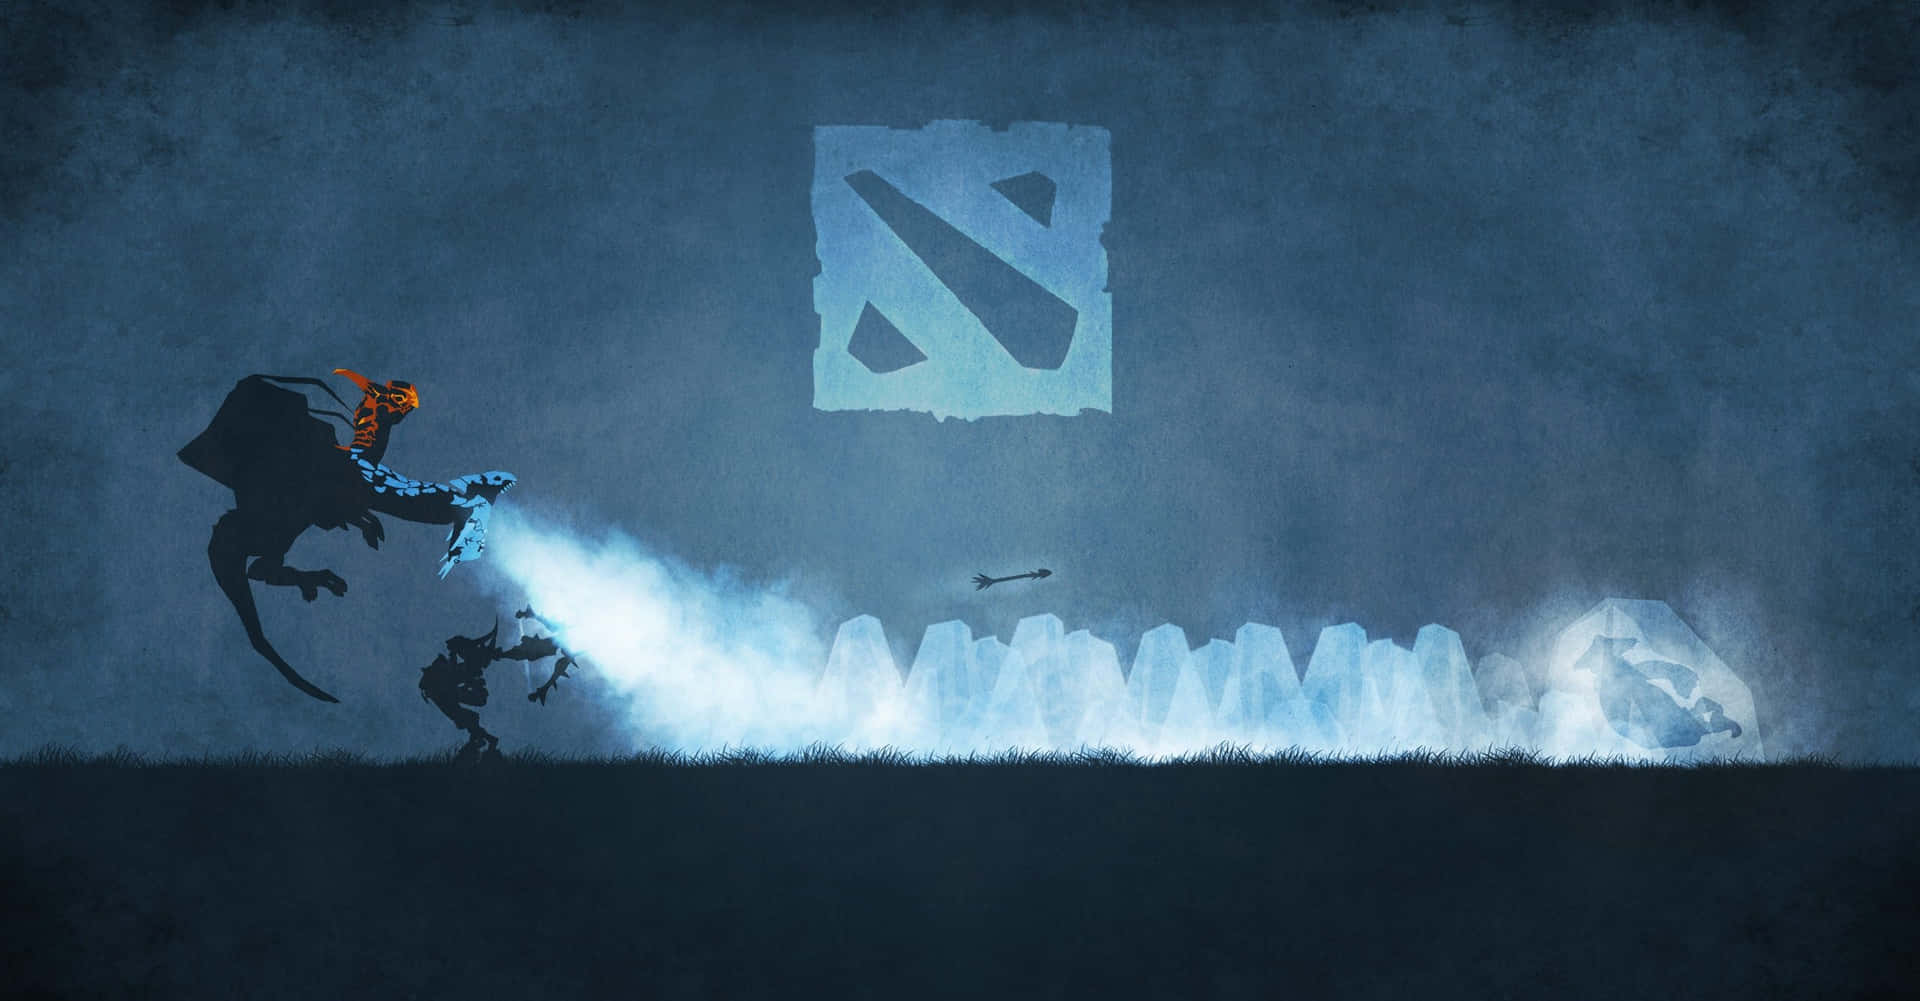 Enter the Great Battle with Dota Wallpaper